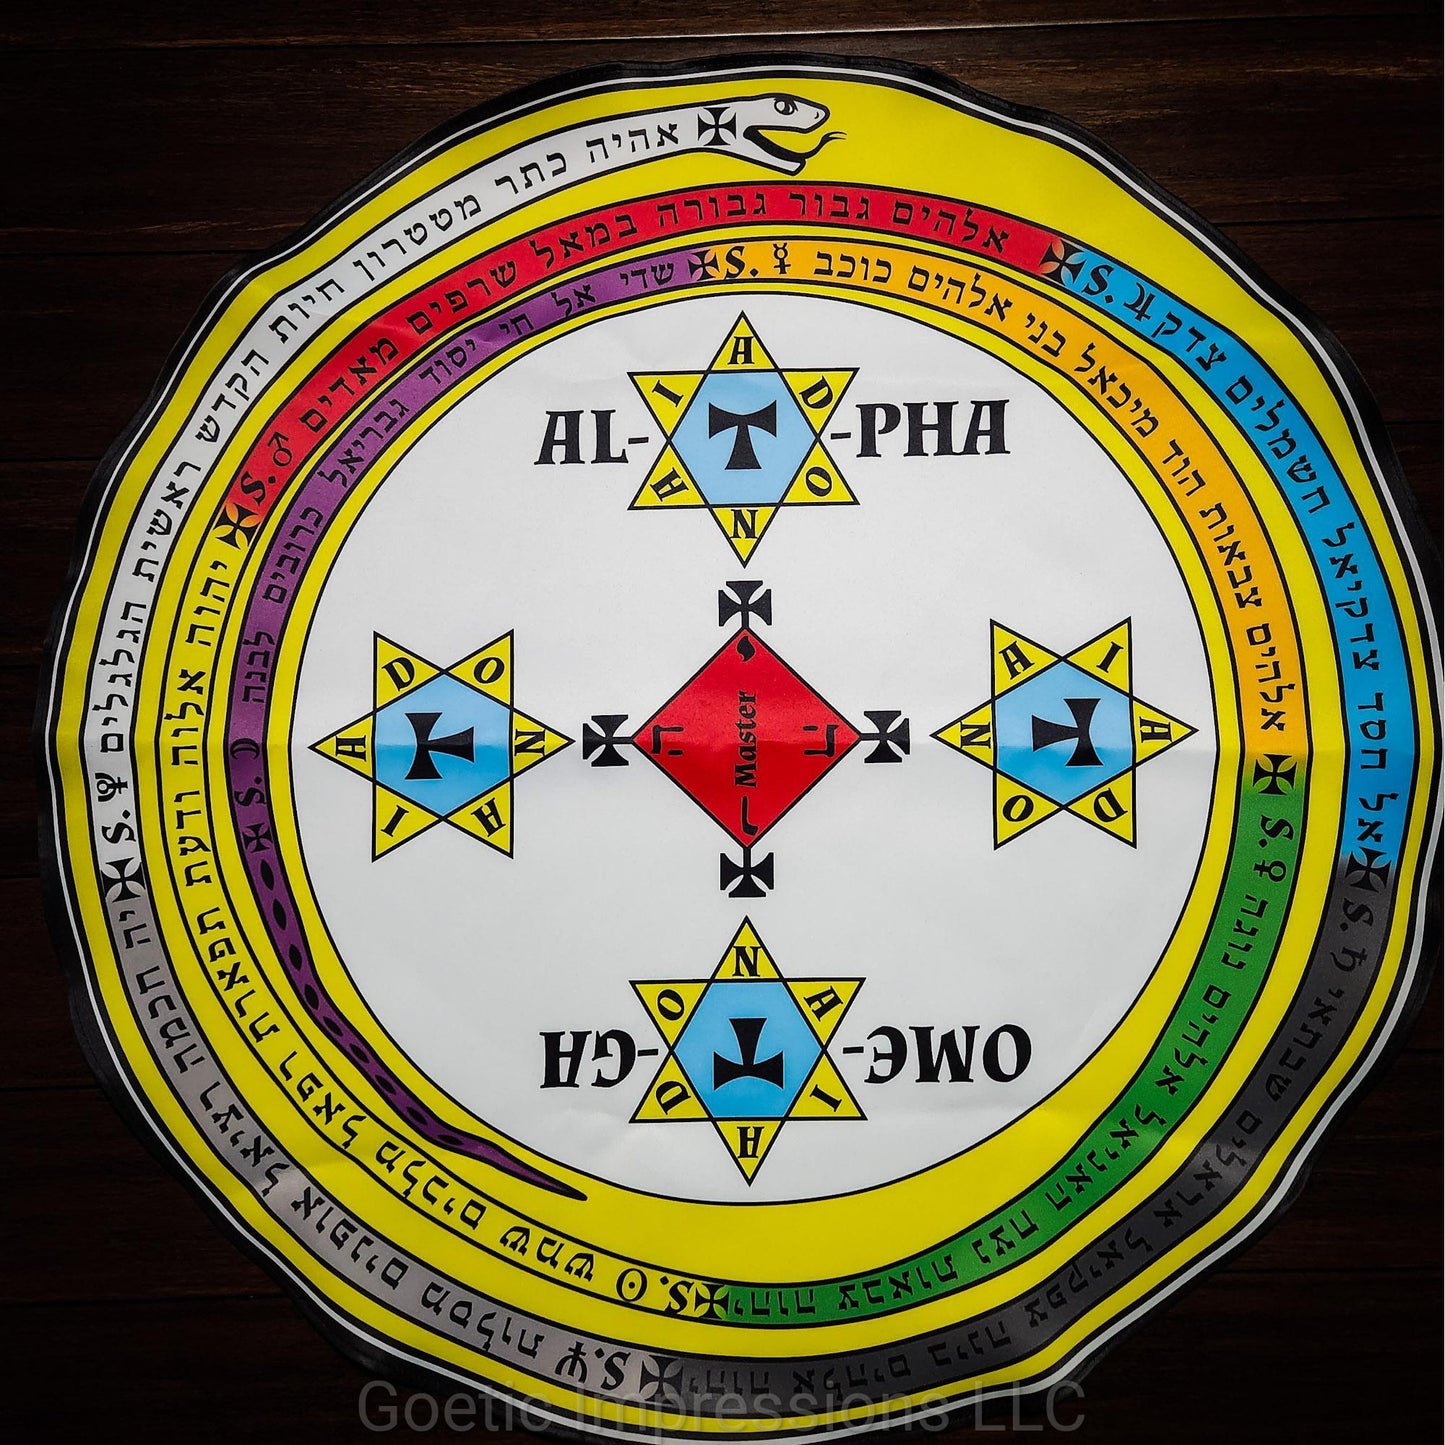 The magickal circle of Solomon in qabalistic colors. The text on the serpent is in Hebrew.